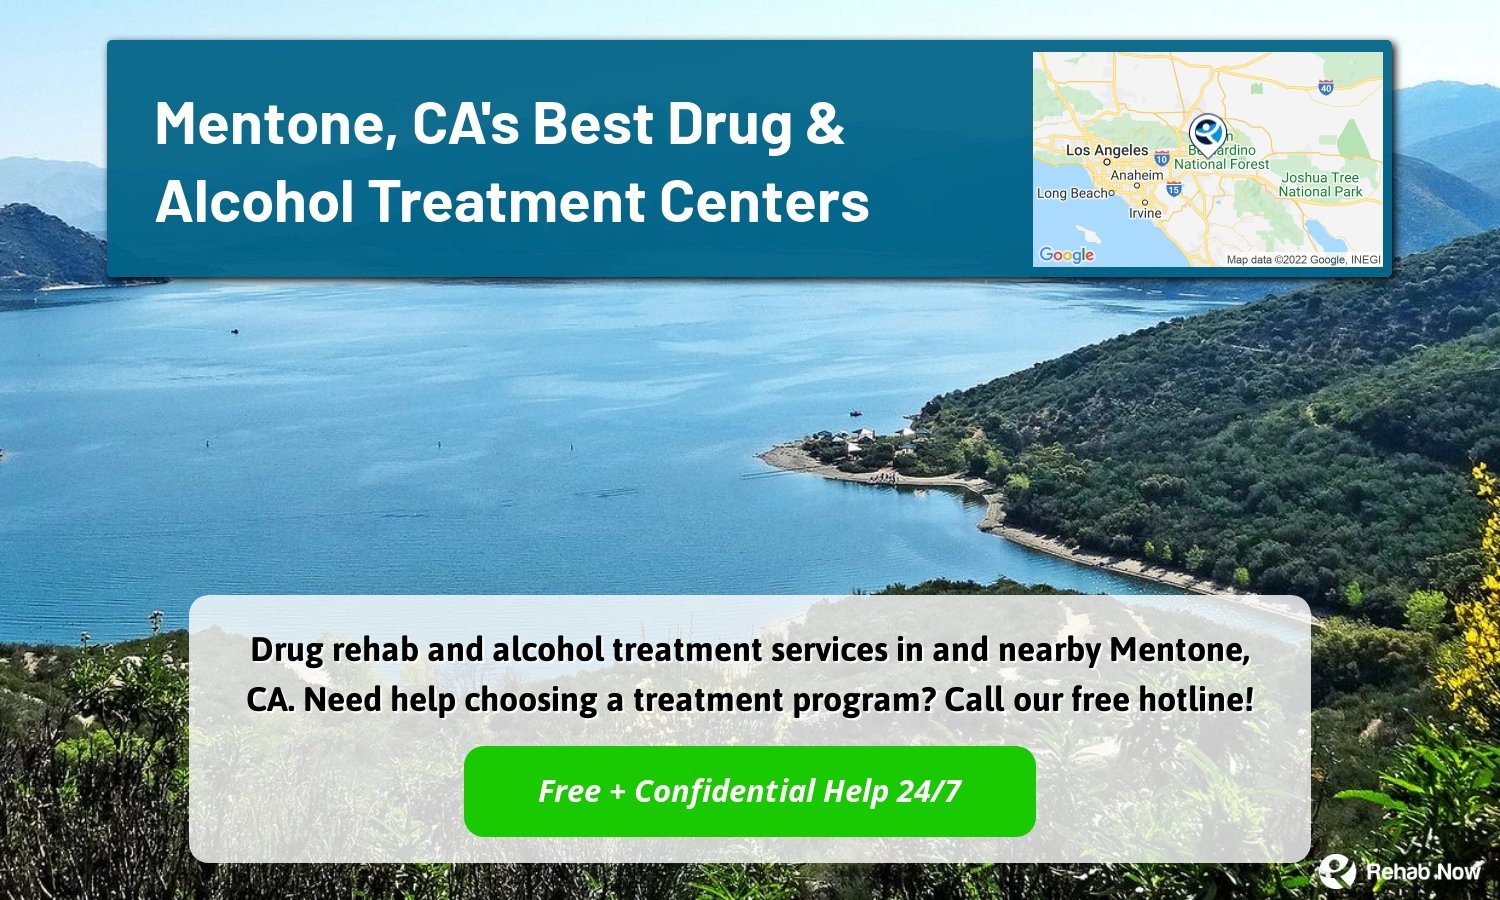 Drug rehab and alcohol treatment services in and nearby Mentone, CA. Need help choosing a treatment program? Call our free hotline!